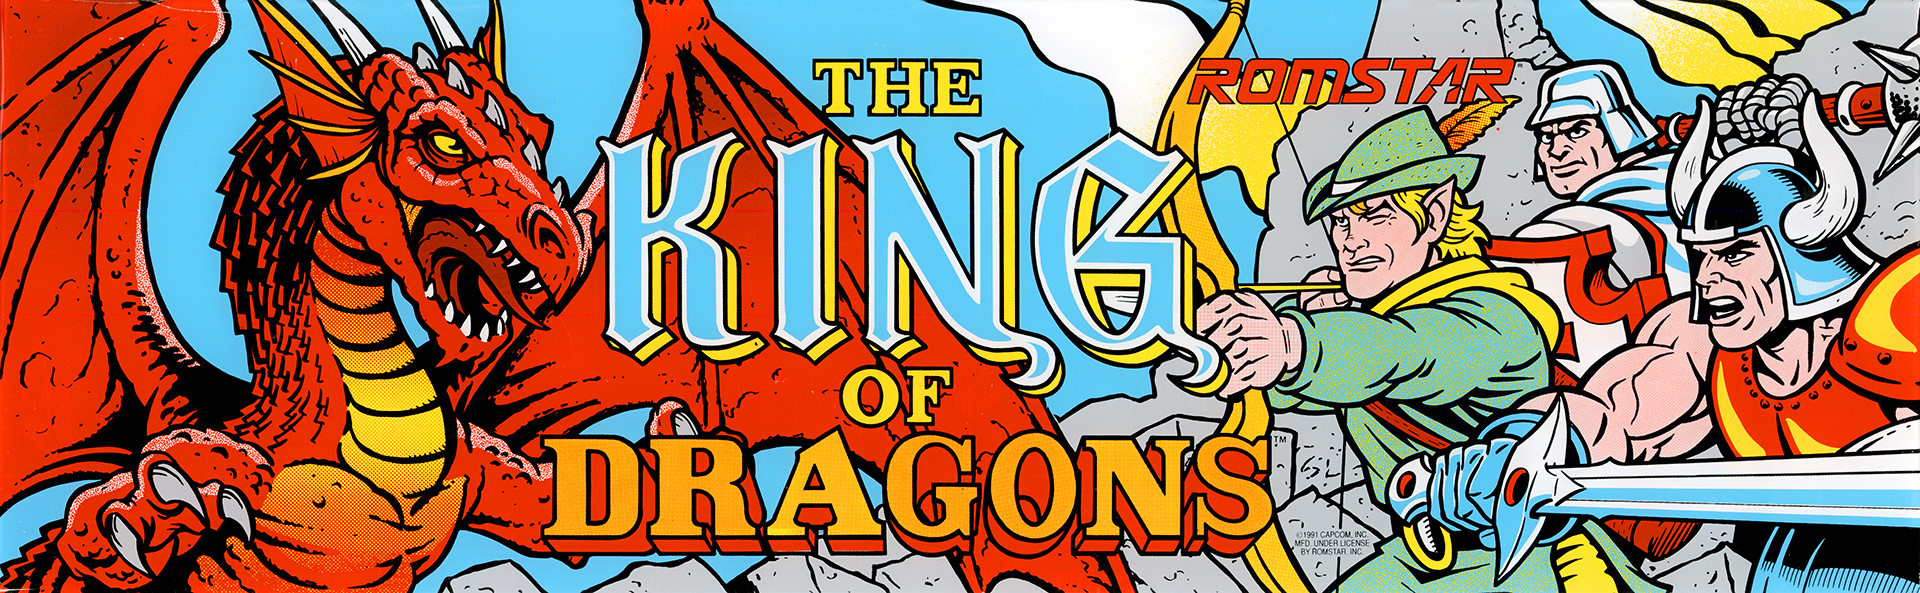 Rage of Kings: Dragon Campaign for windows download free